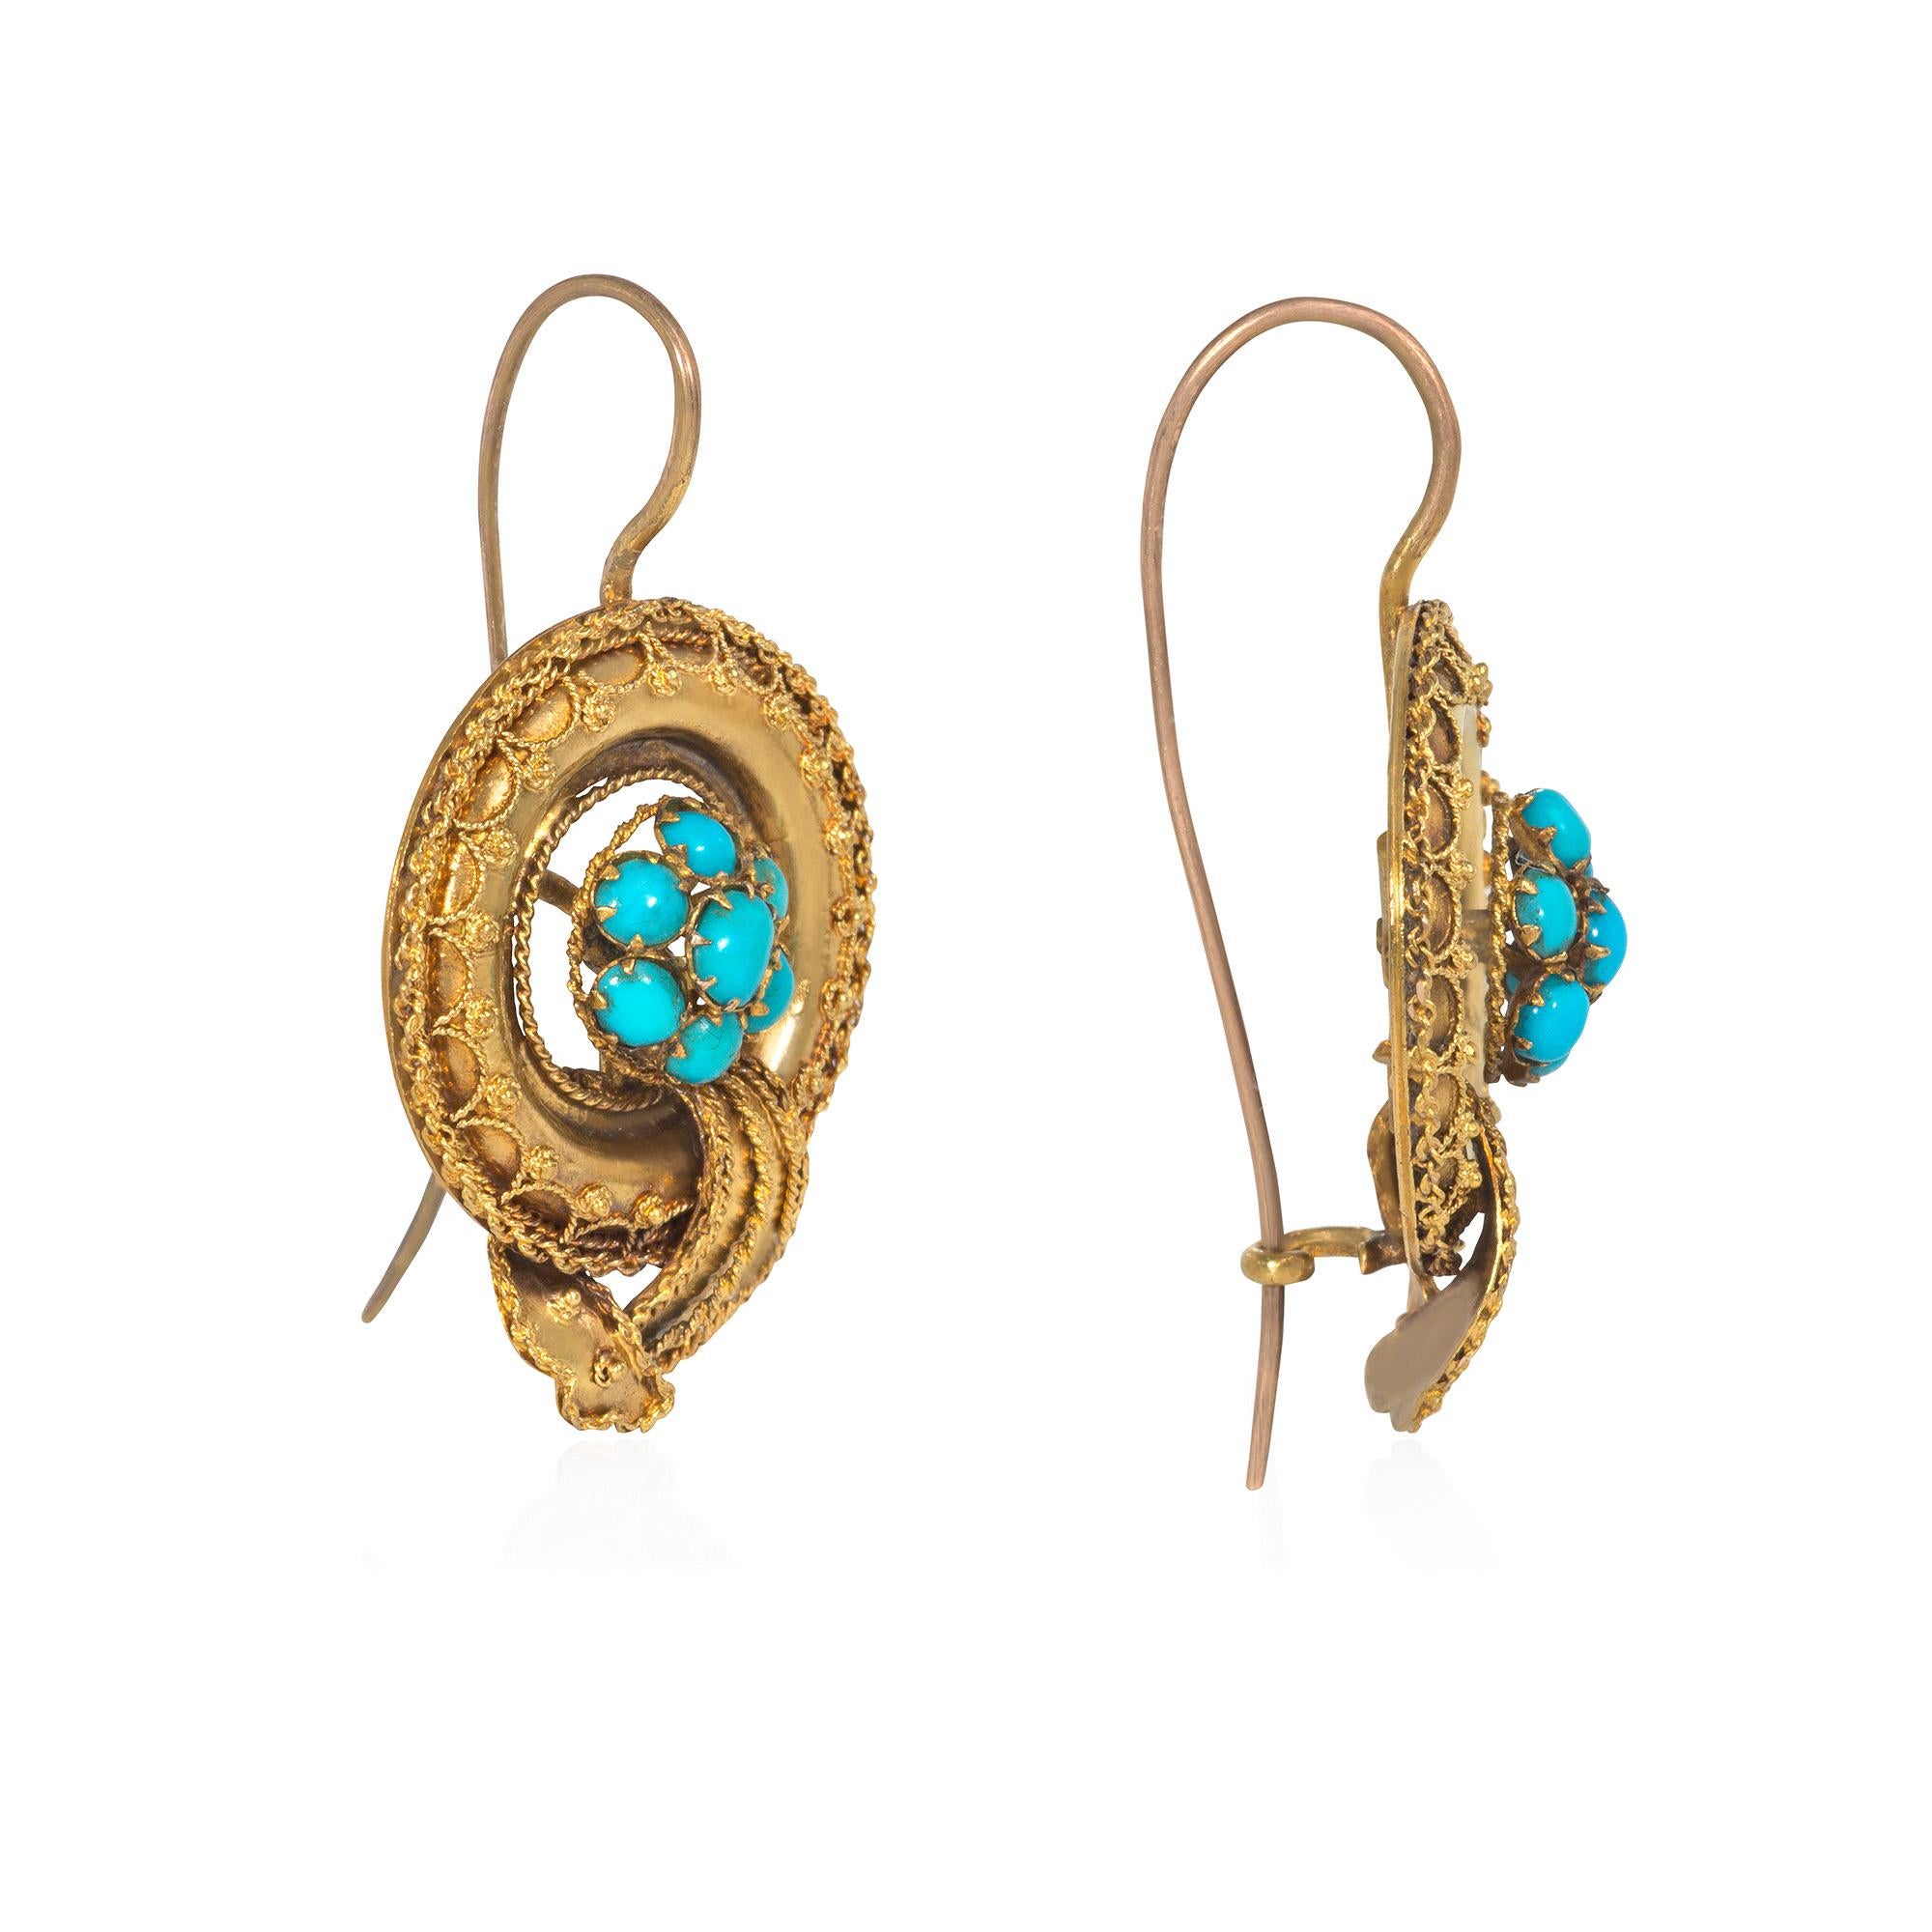 A pair of antique gold earrings designed as pavé turquoise bullas in gold frames with applied granulation and wirework and draped sashes, in 14k.  Approximately 1.5 inches long, including top of wire